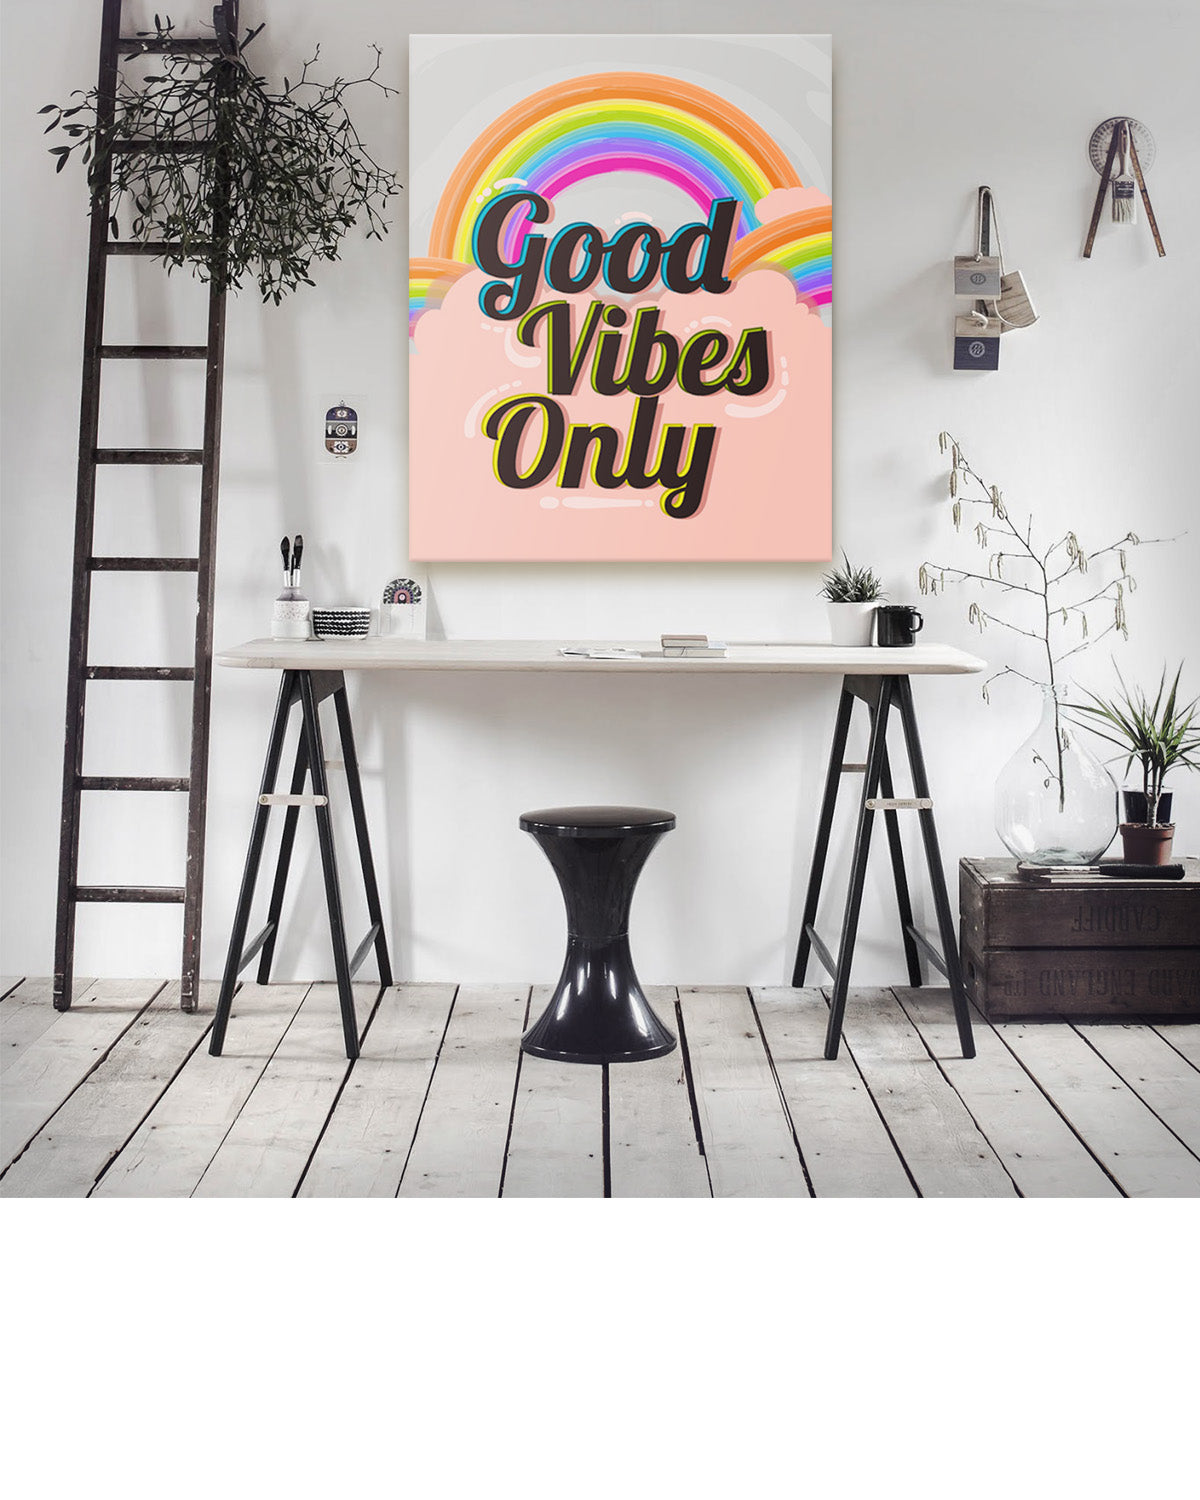 Good Vibes Only Wall Art Decor Print - unframed artwork printed on canvas